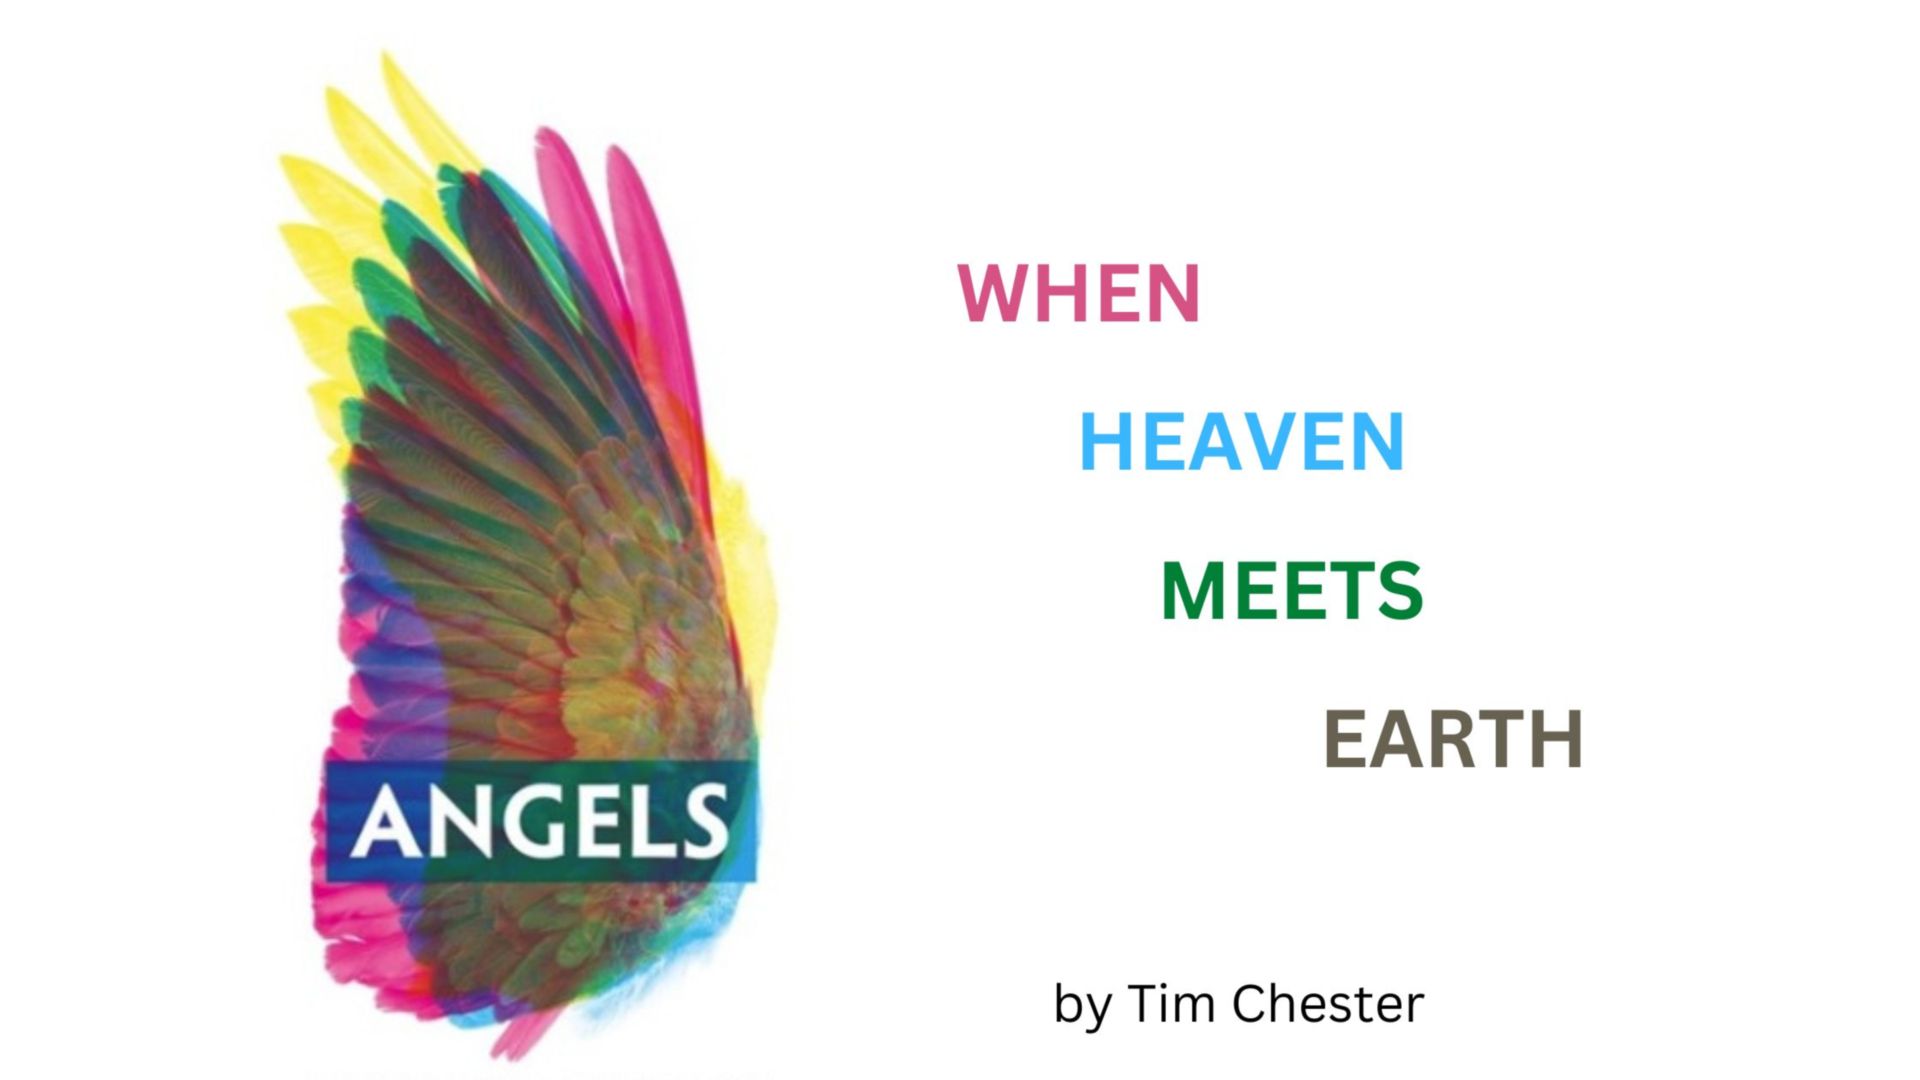 A review of Tim Chester's book 'Angels'